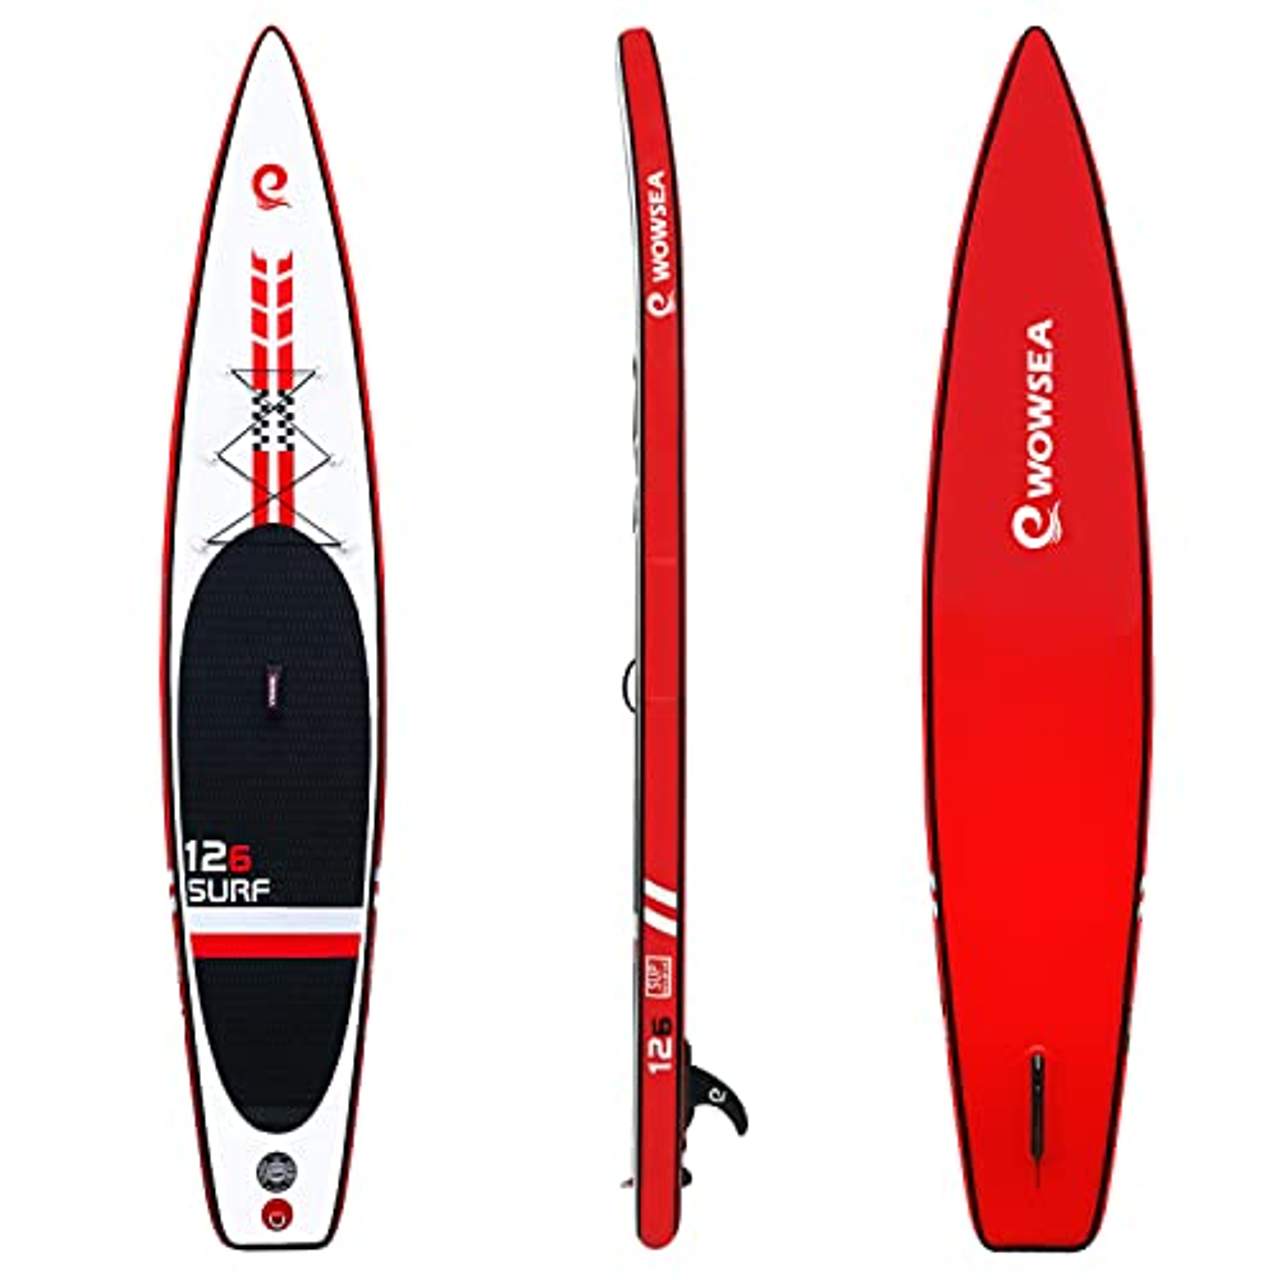 WOWSEA Racer Aufblasbares Stand Up Paddle Board